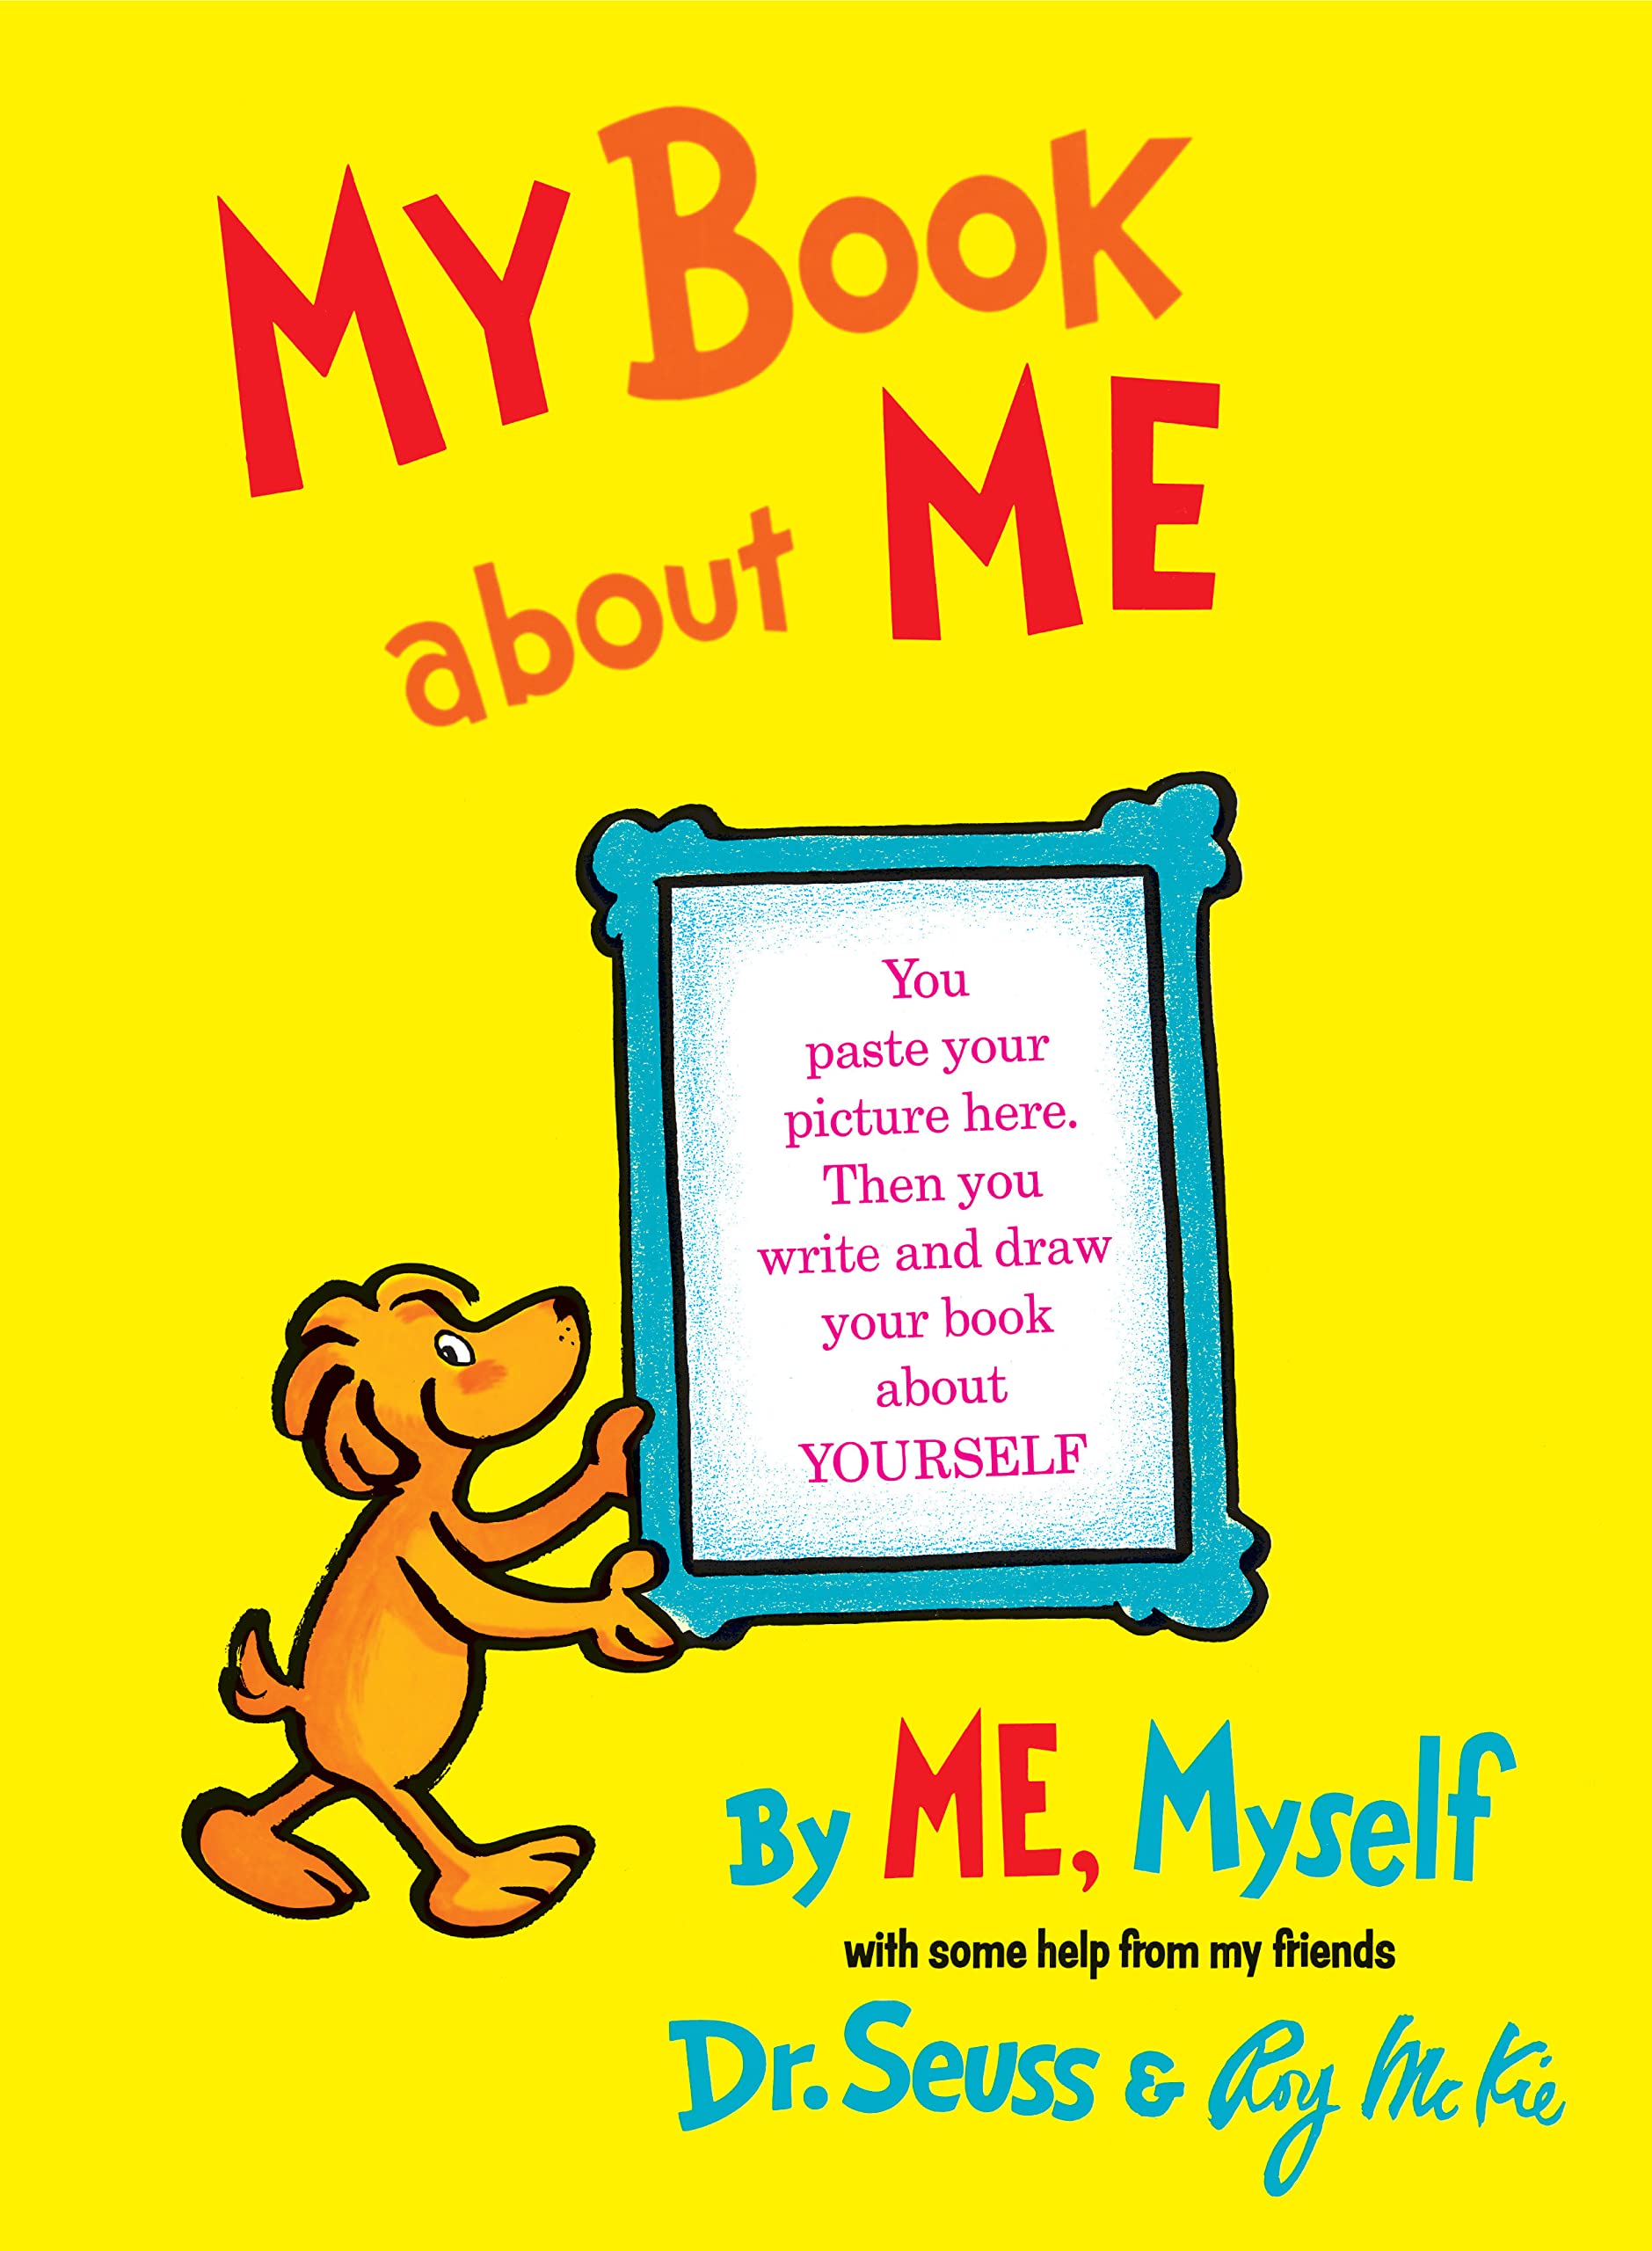 My Book About Me